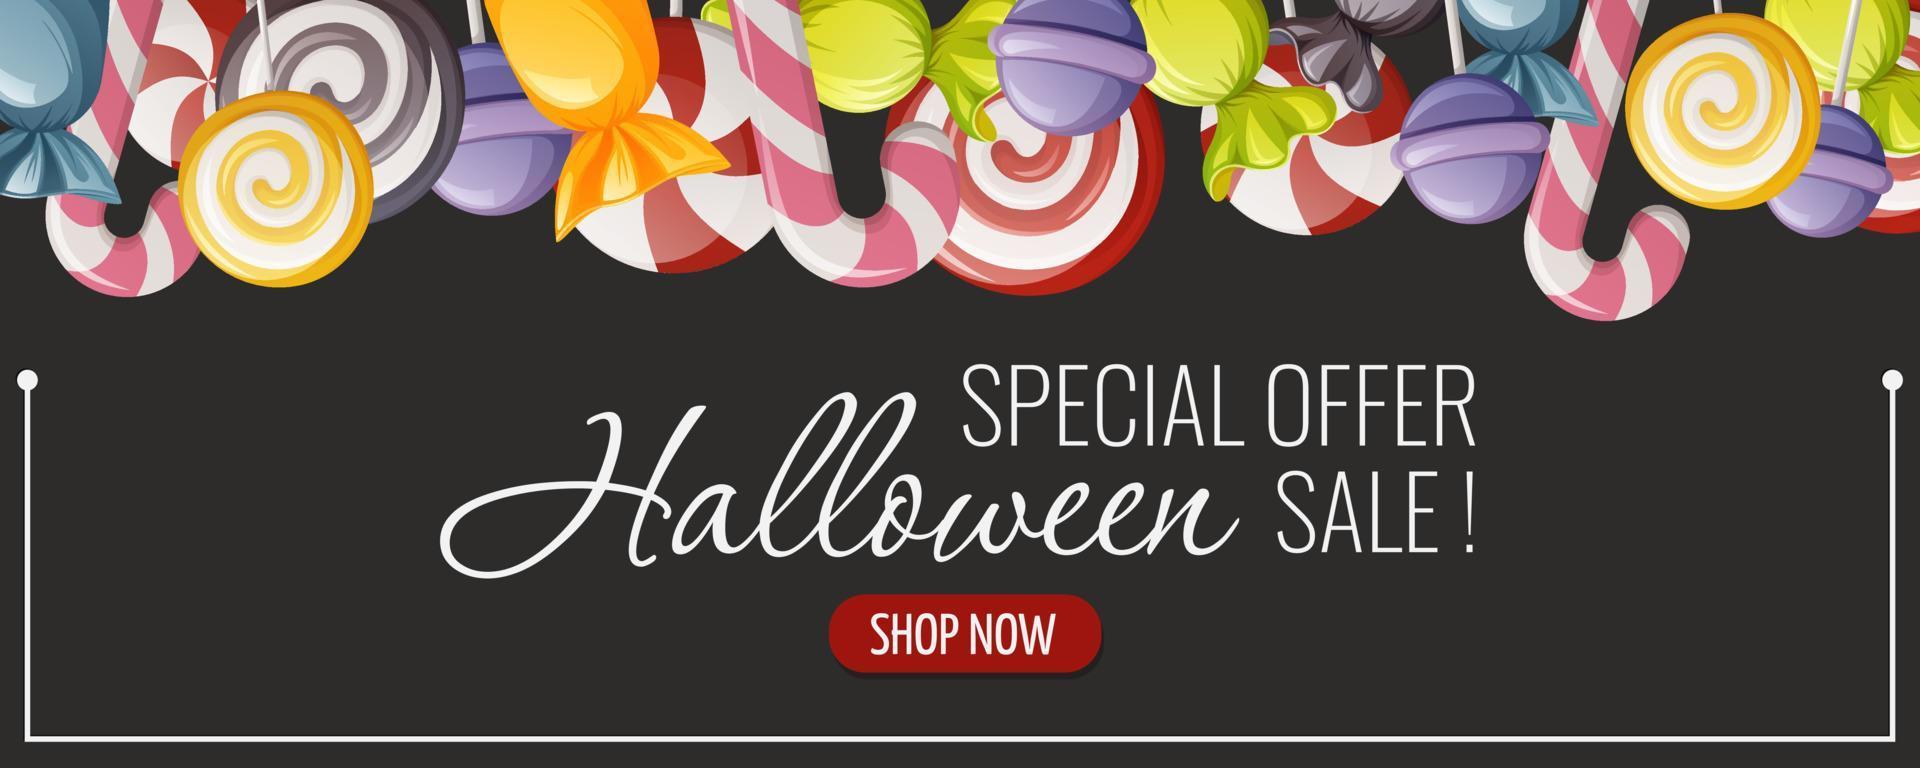 Halloween sale flyer. Sweet treat from lollipops, candies. Vector illustration. For banner, advertising, special offer.